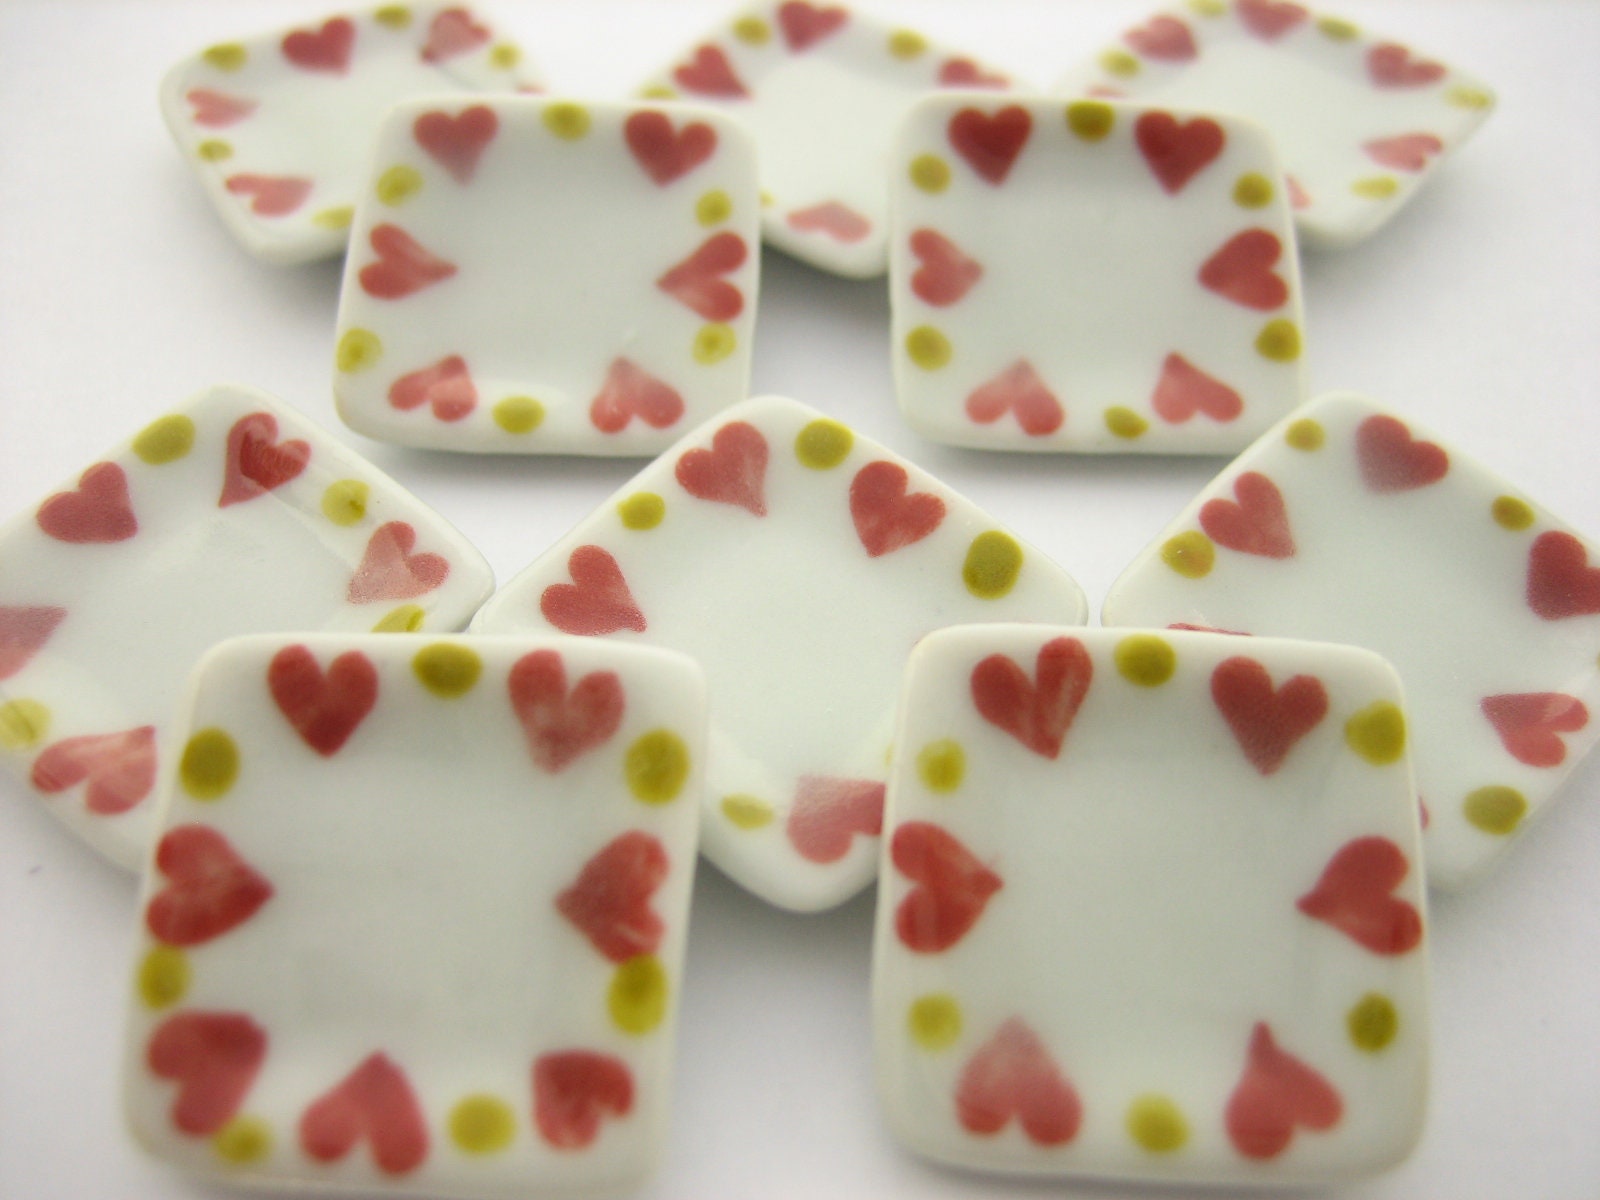 20x20 mm.Painted Red Heart Scalloped Plates Dollhouse Miniatures Ceramic Deco 